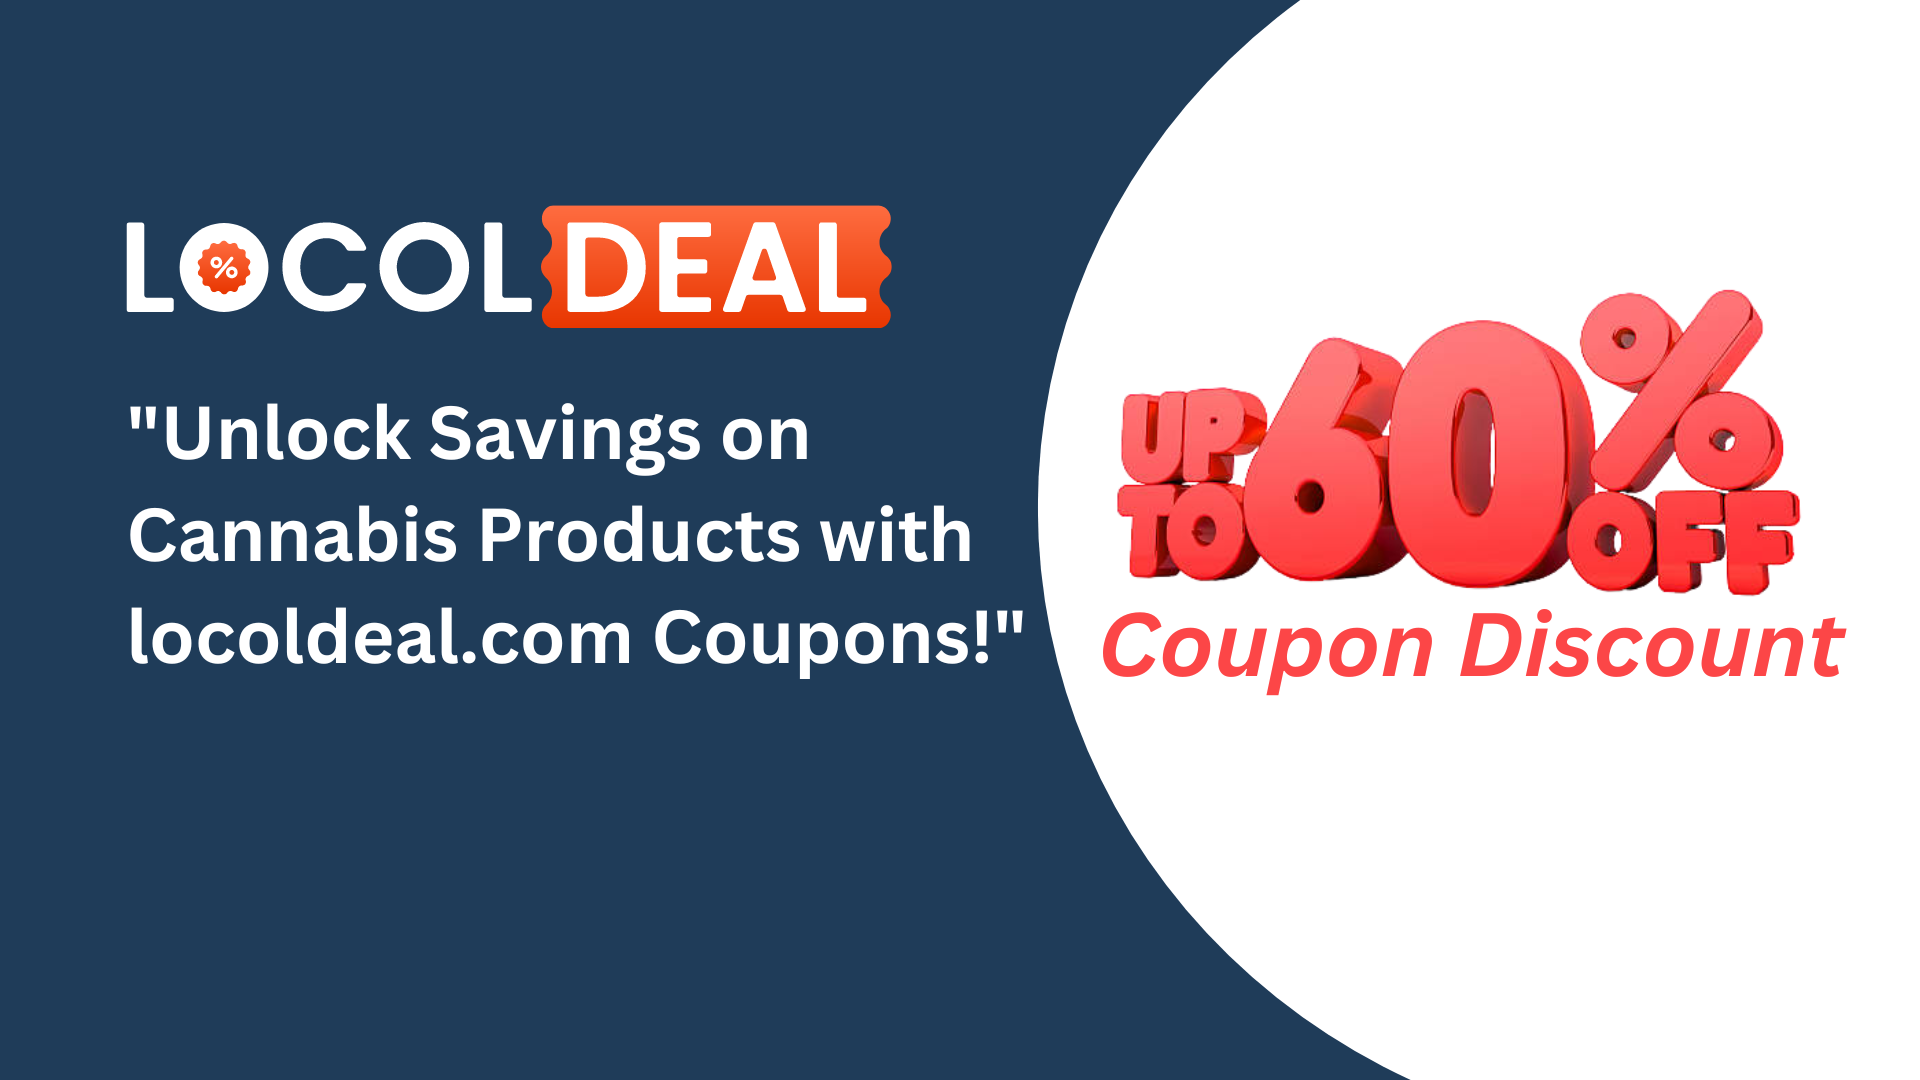 “Unlock Savings on Cannabis Products with locoldeal.com Coupons!”